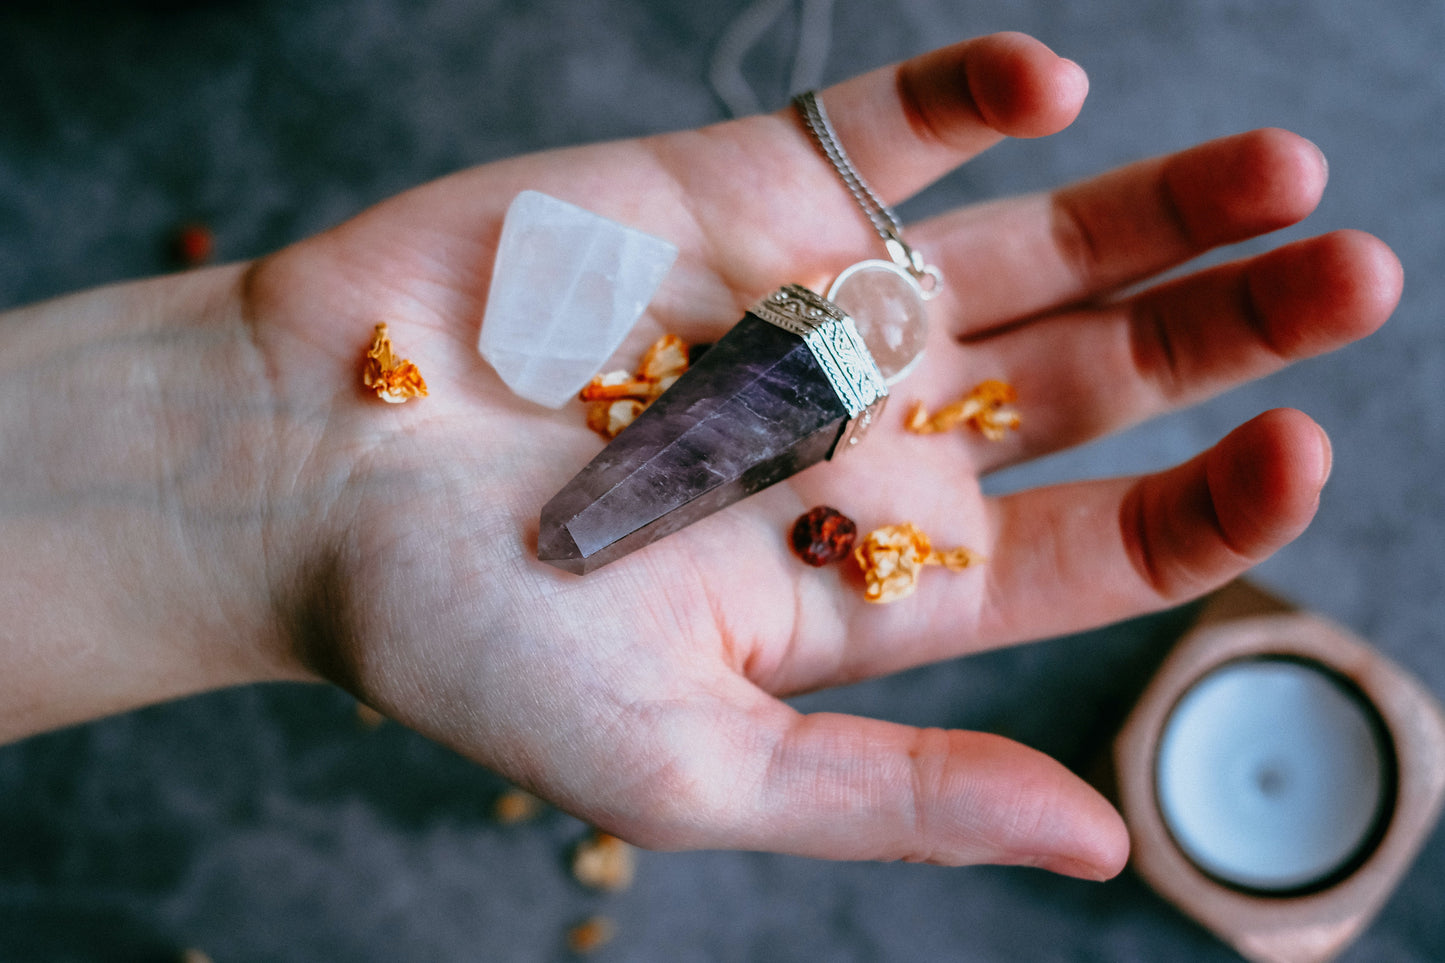 An amethyst pendulum and a small piece of quartz sit on an open palm with a tea candle in the background.